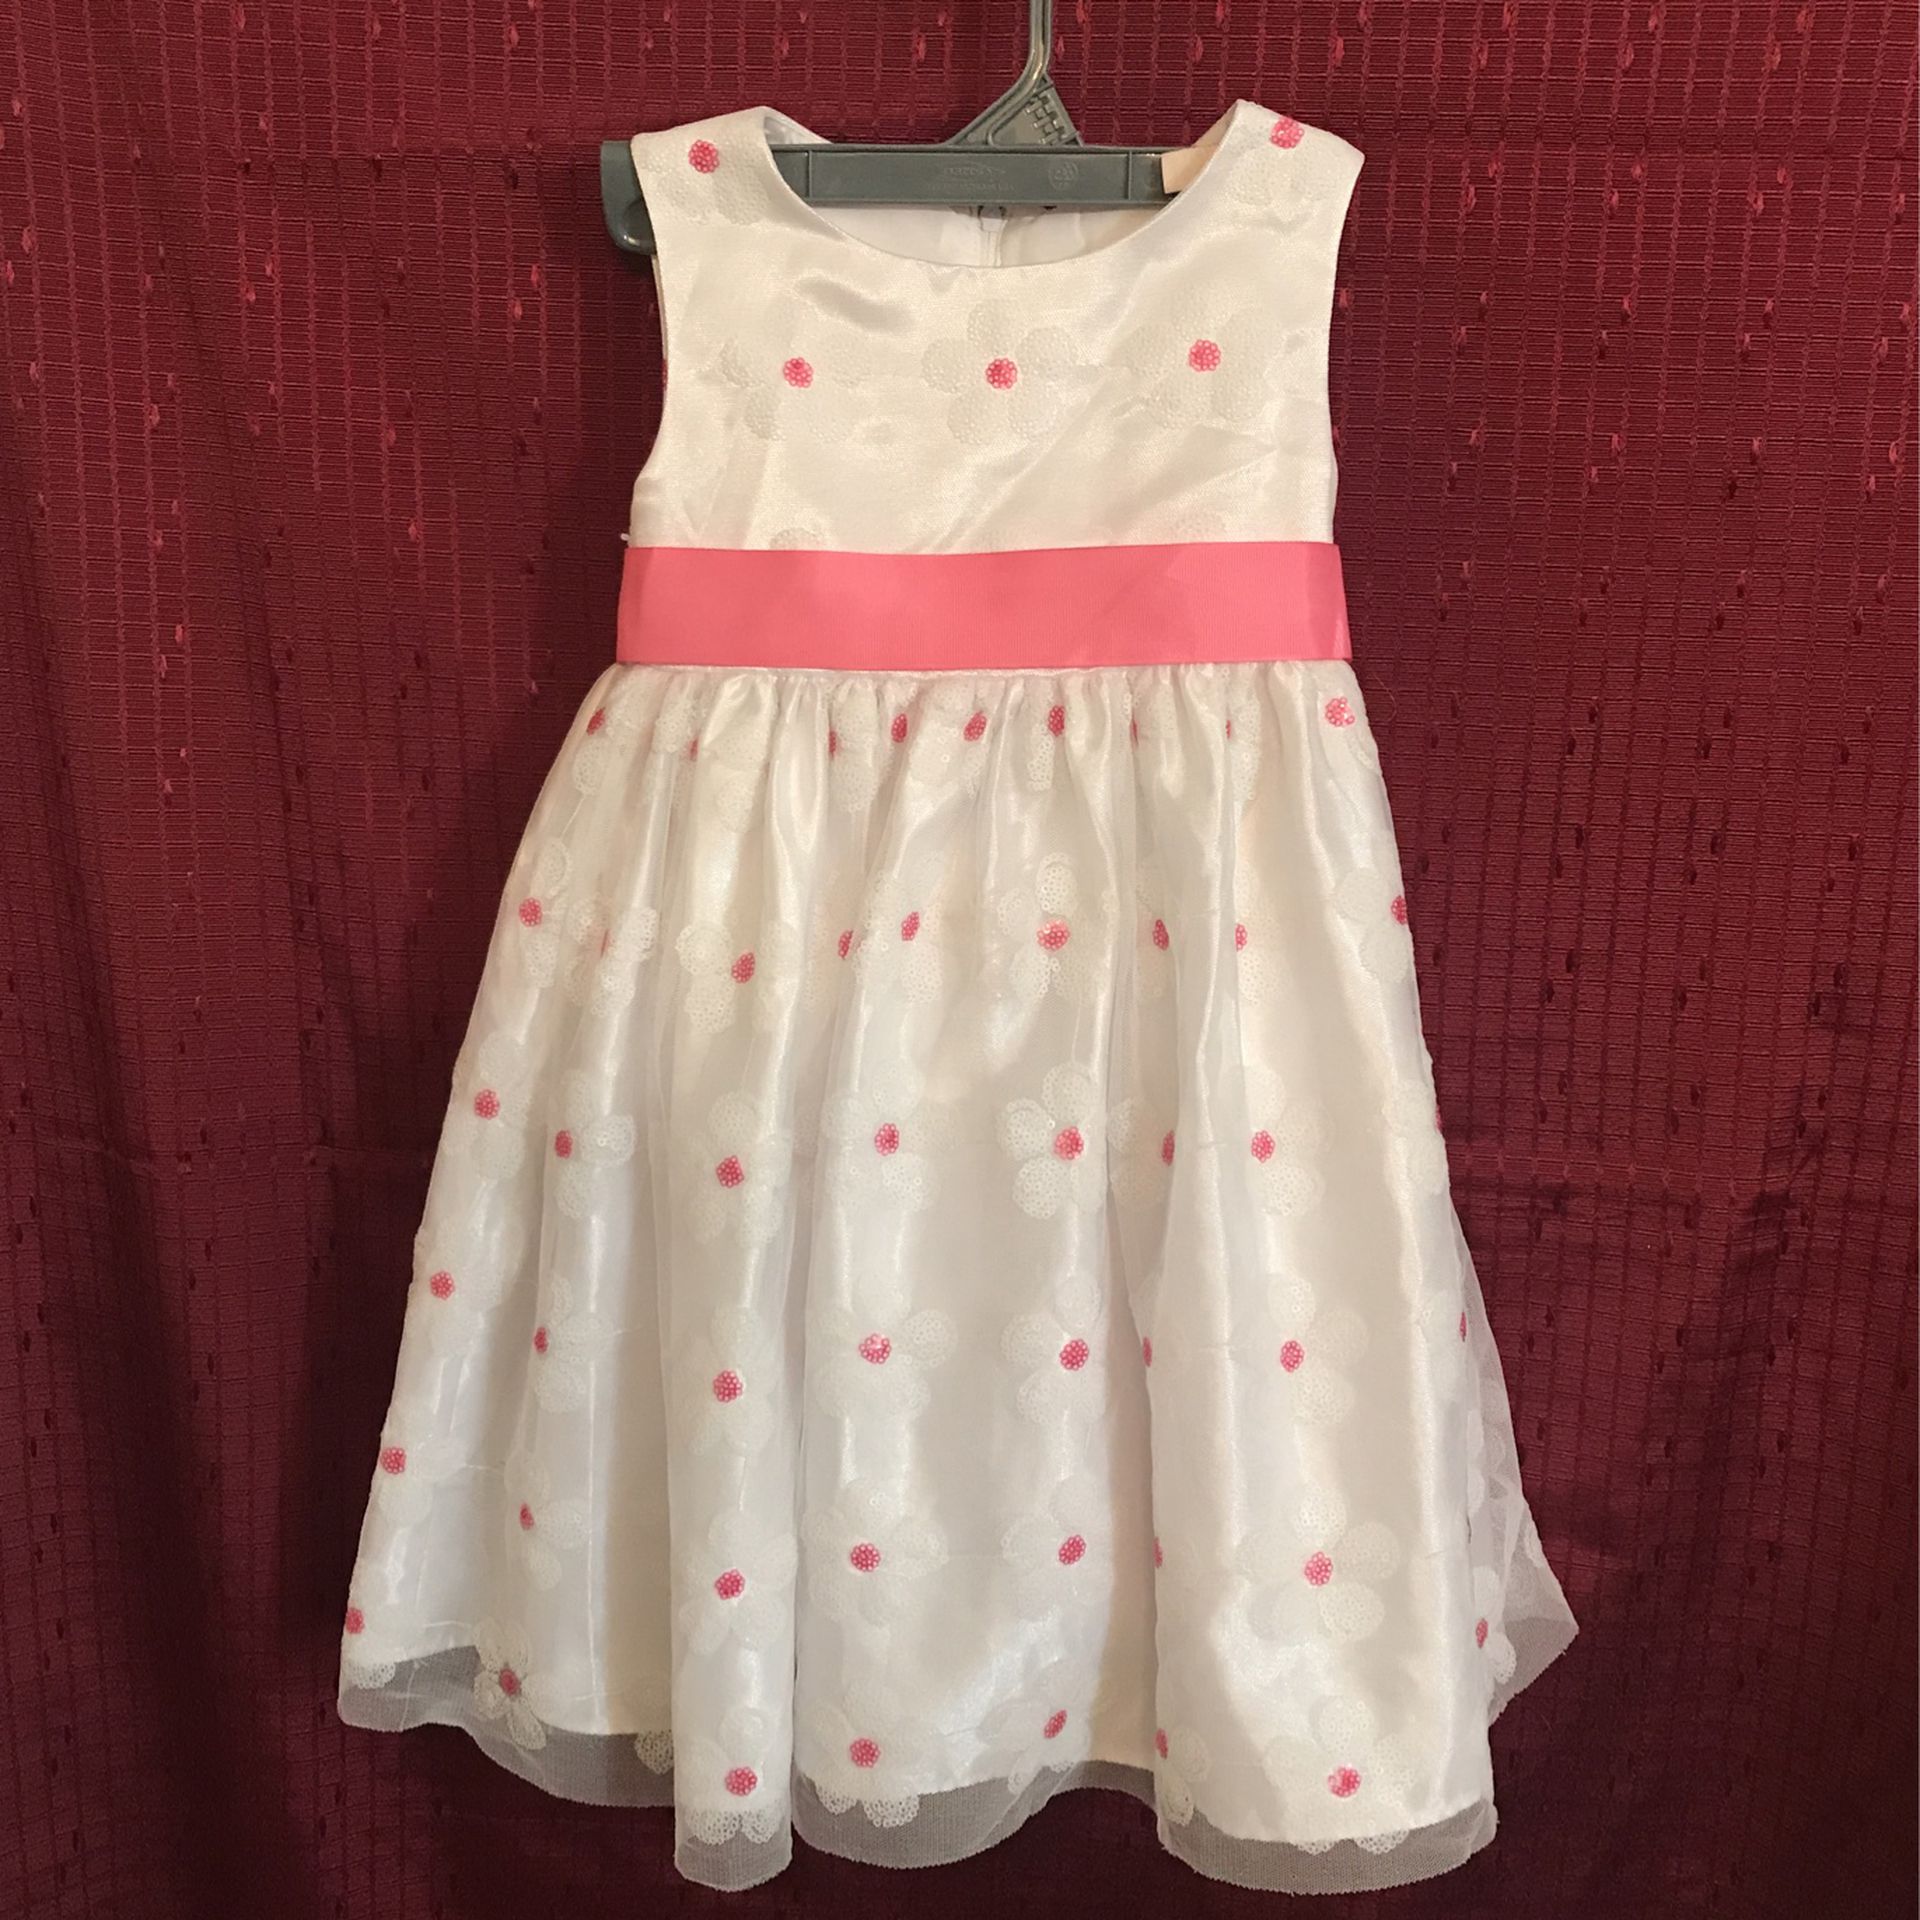 Princess Faith Toddler Pink And White Dress Size 4t